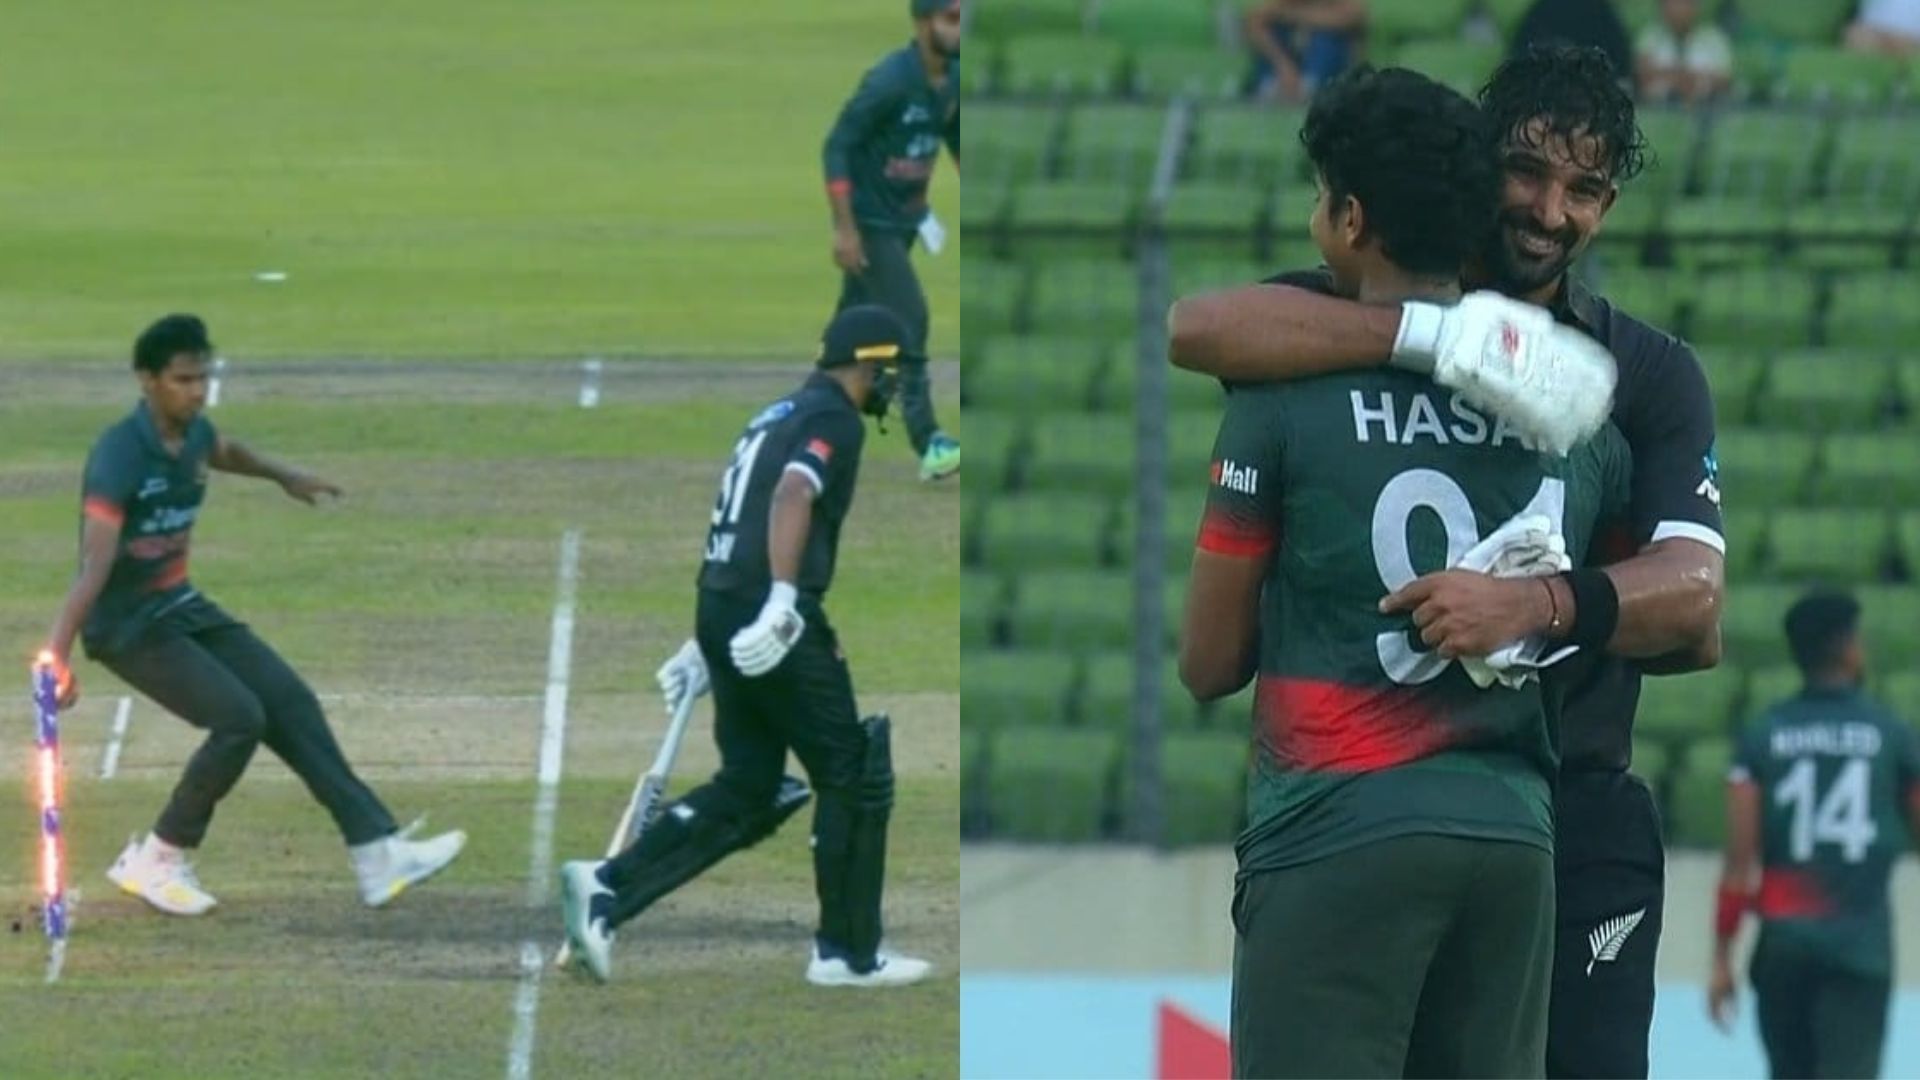 Snippets from the run-out drama involving Ish Sodhi (P.C.:X)